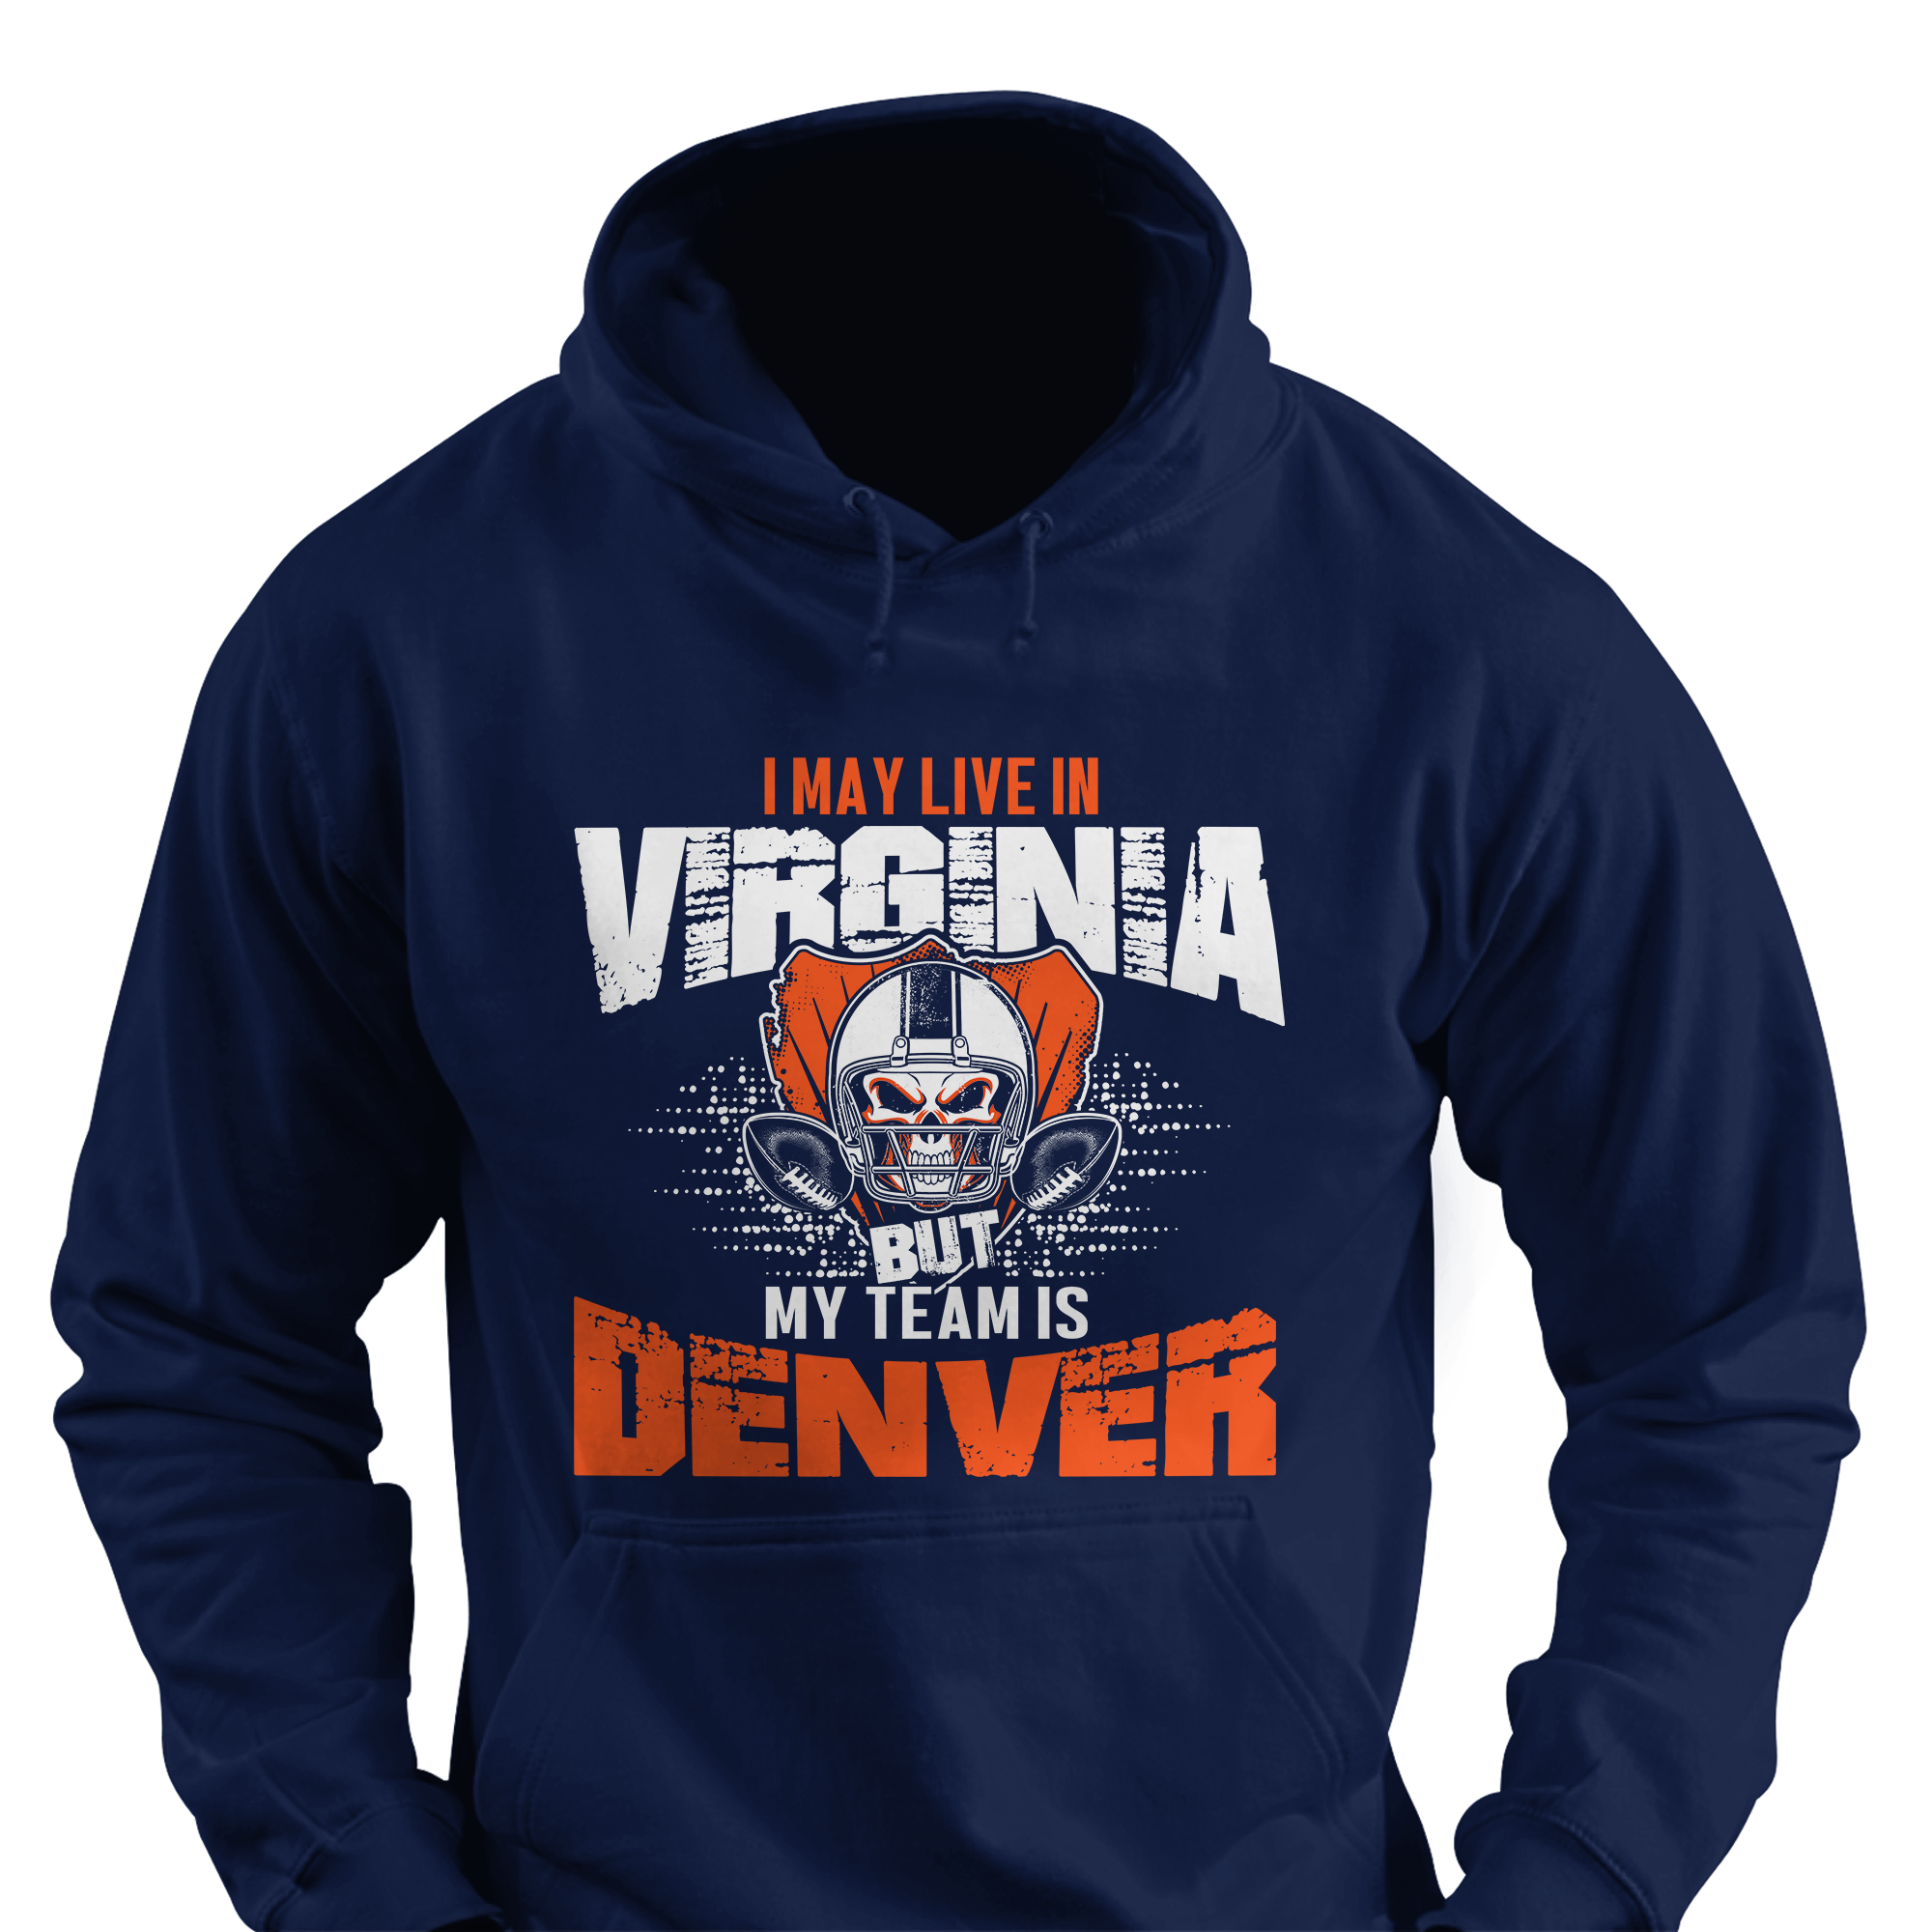 I May Live in Virginia but My Team is Denver